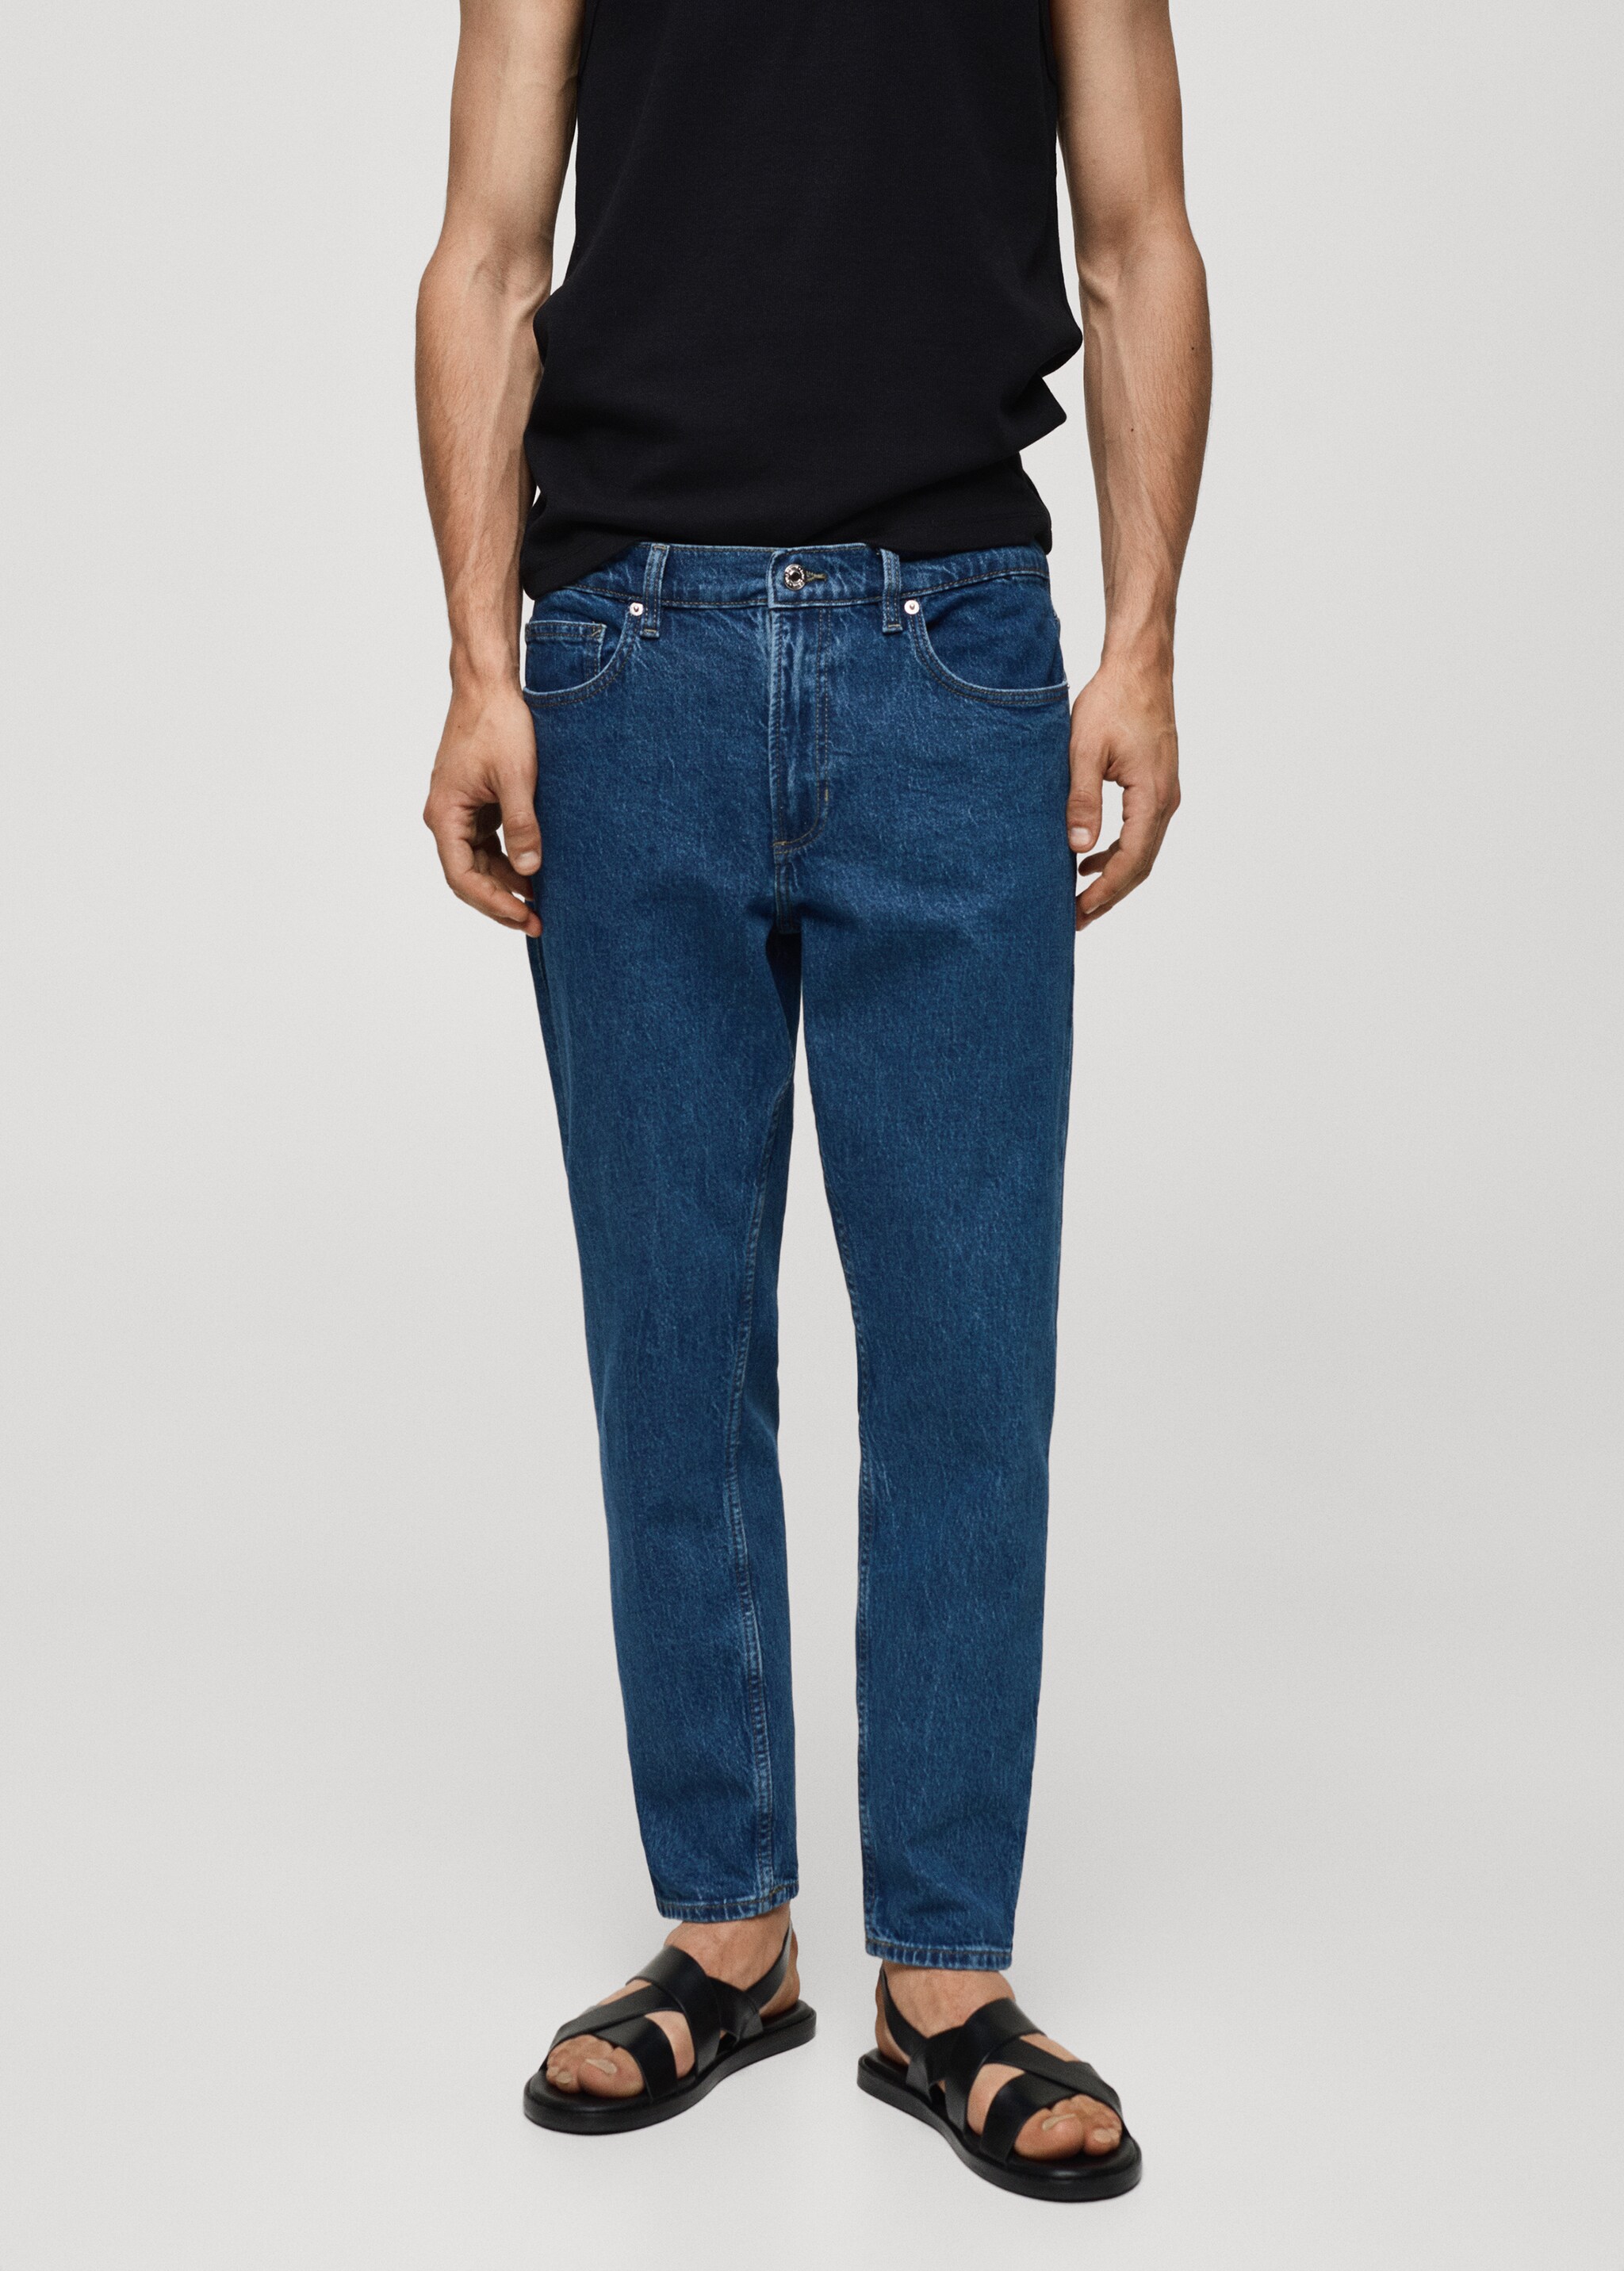 Jeans Ben tappered fit - Plano medio